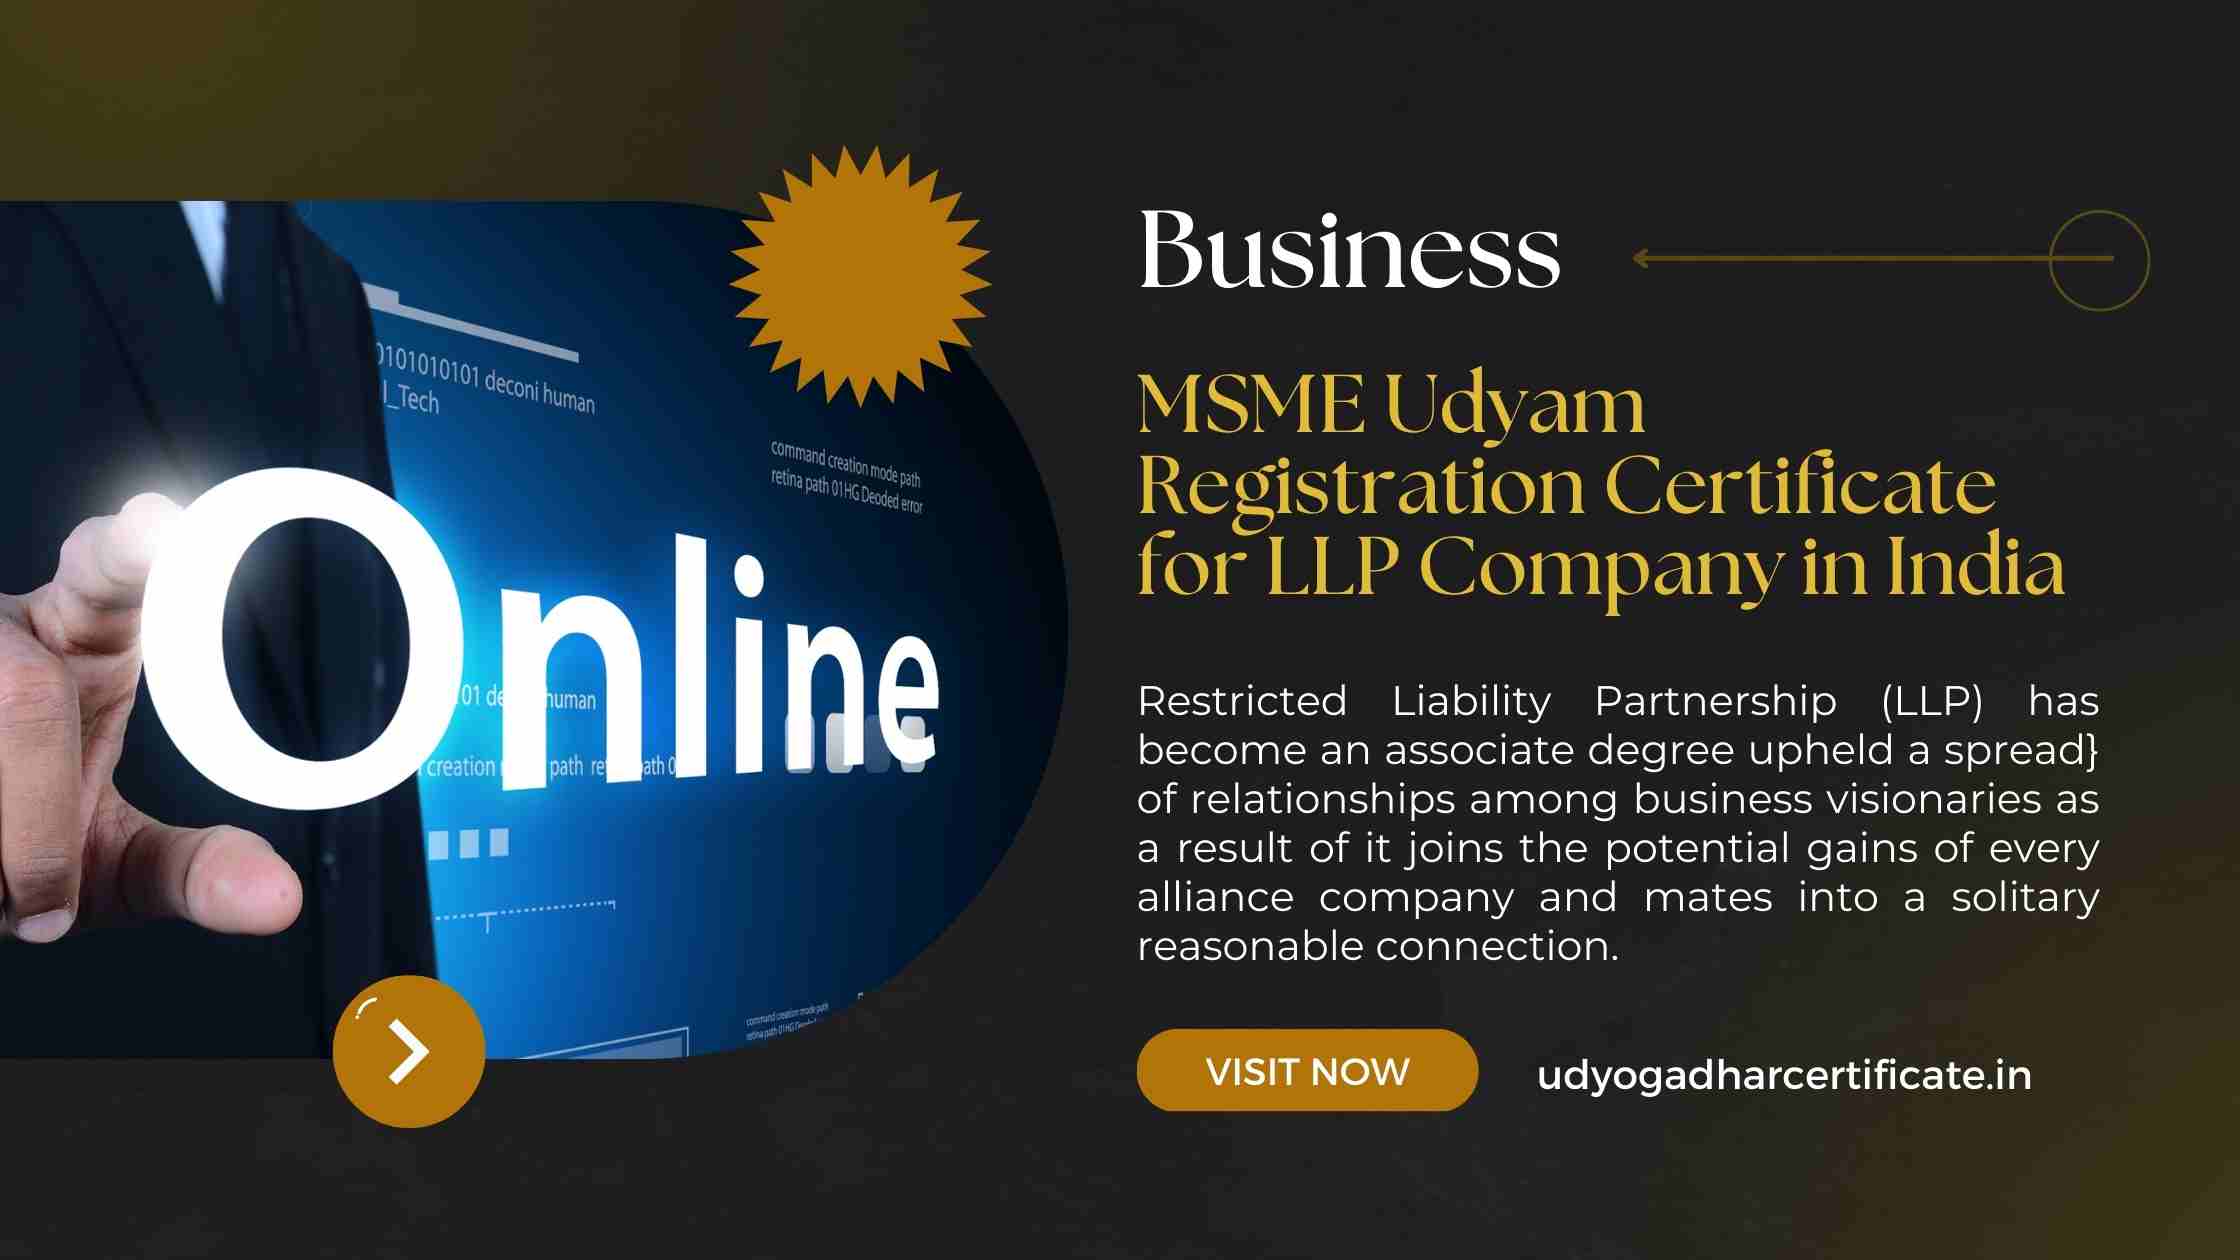 MSME Udyam Registration Certificate for LLP Company in India